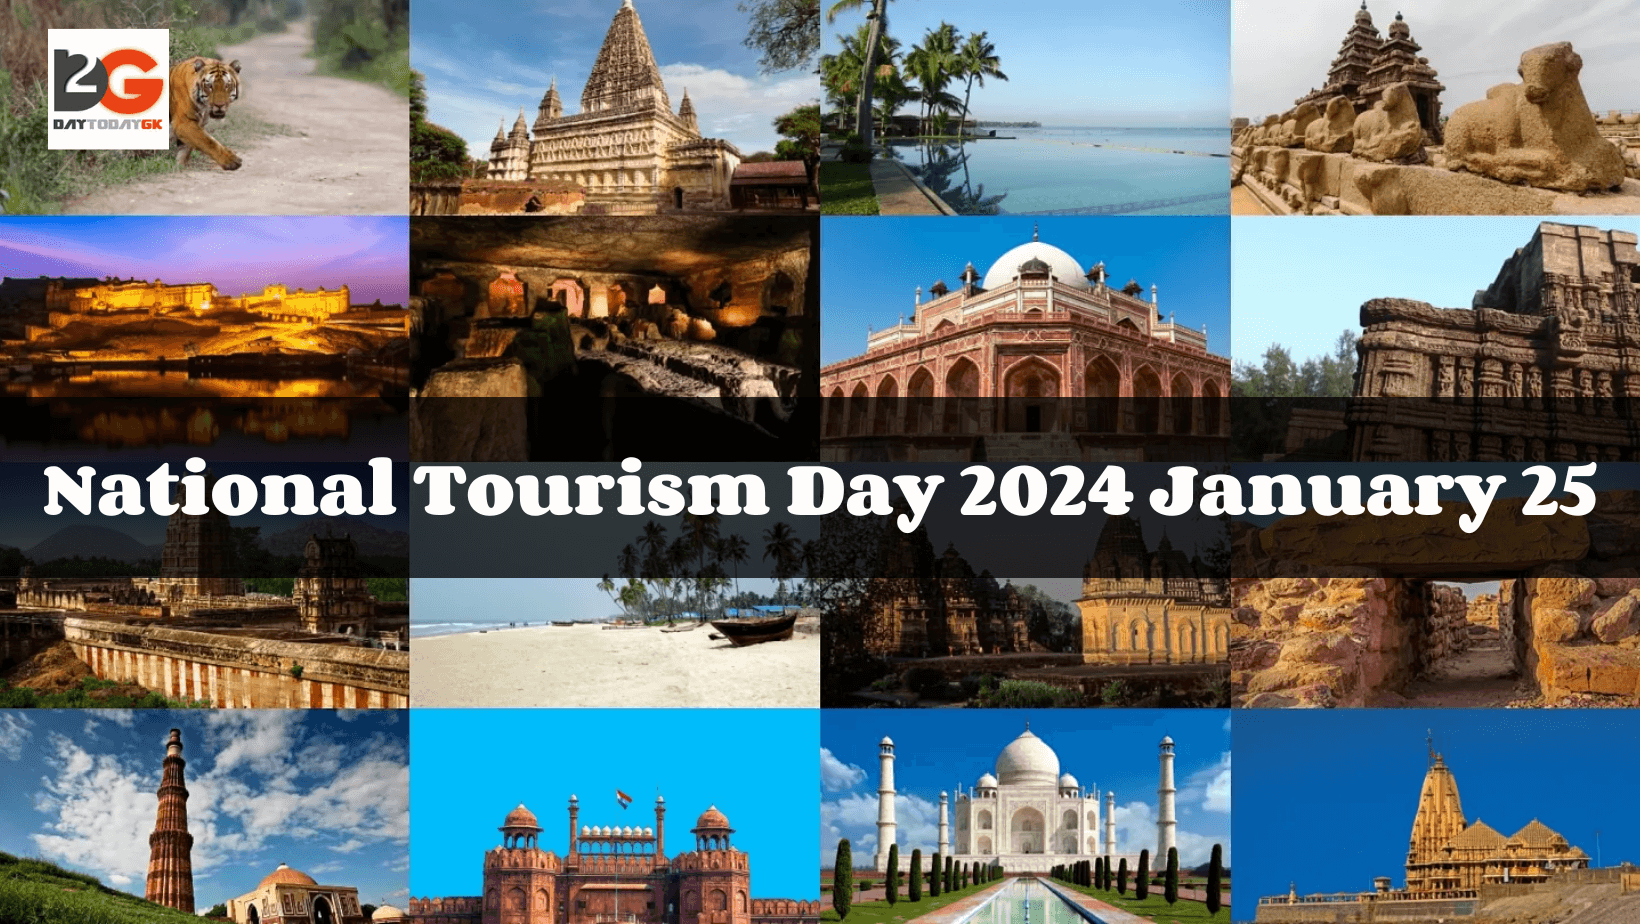 National Tourism Day 2024 is observed on January 25